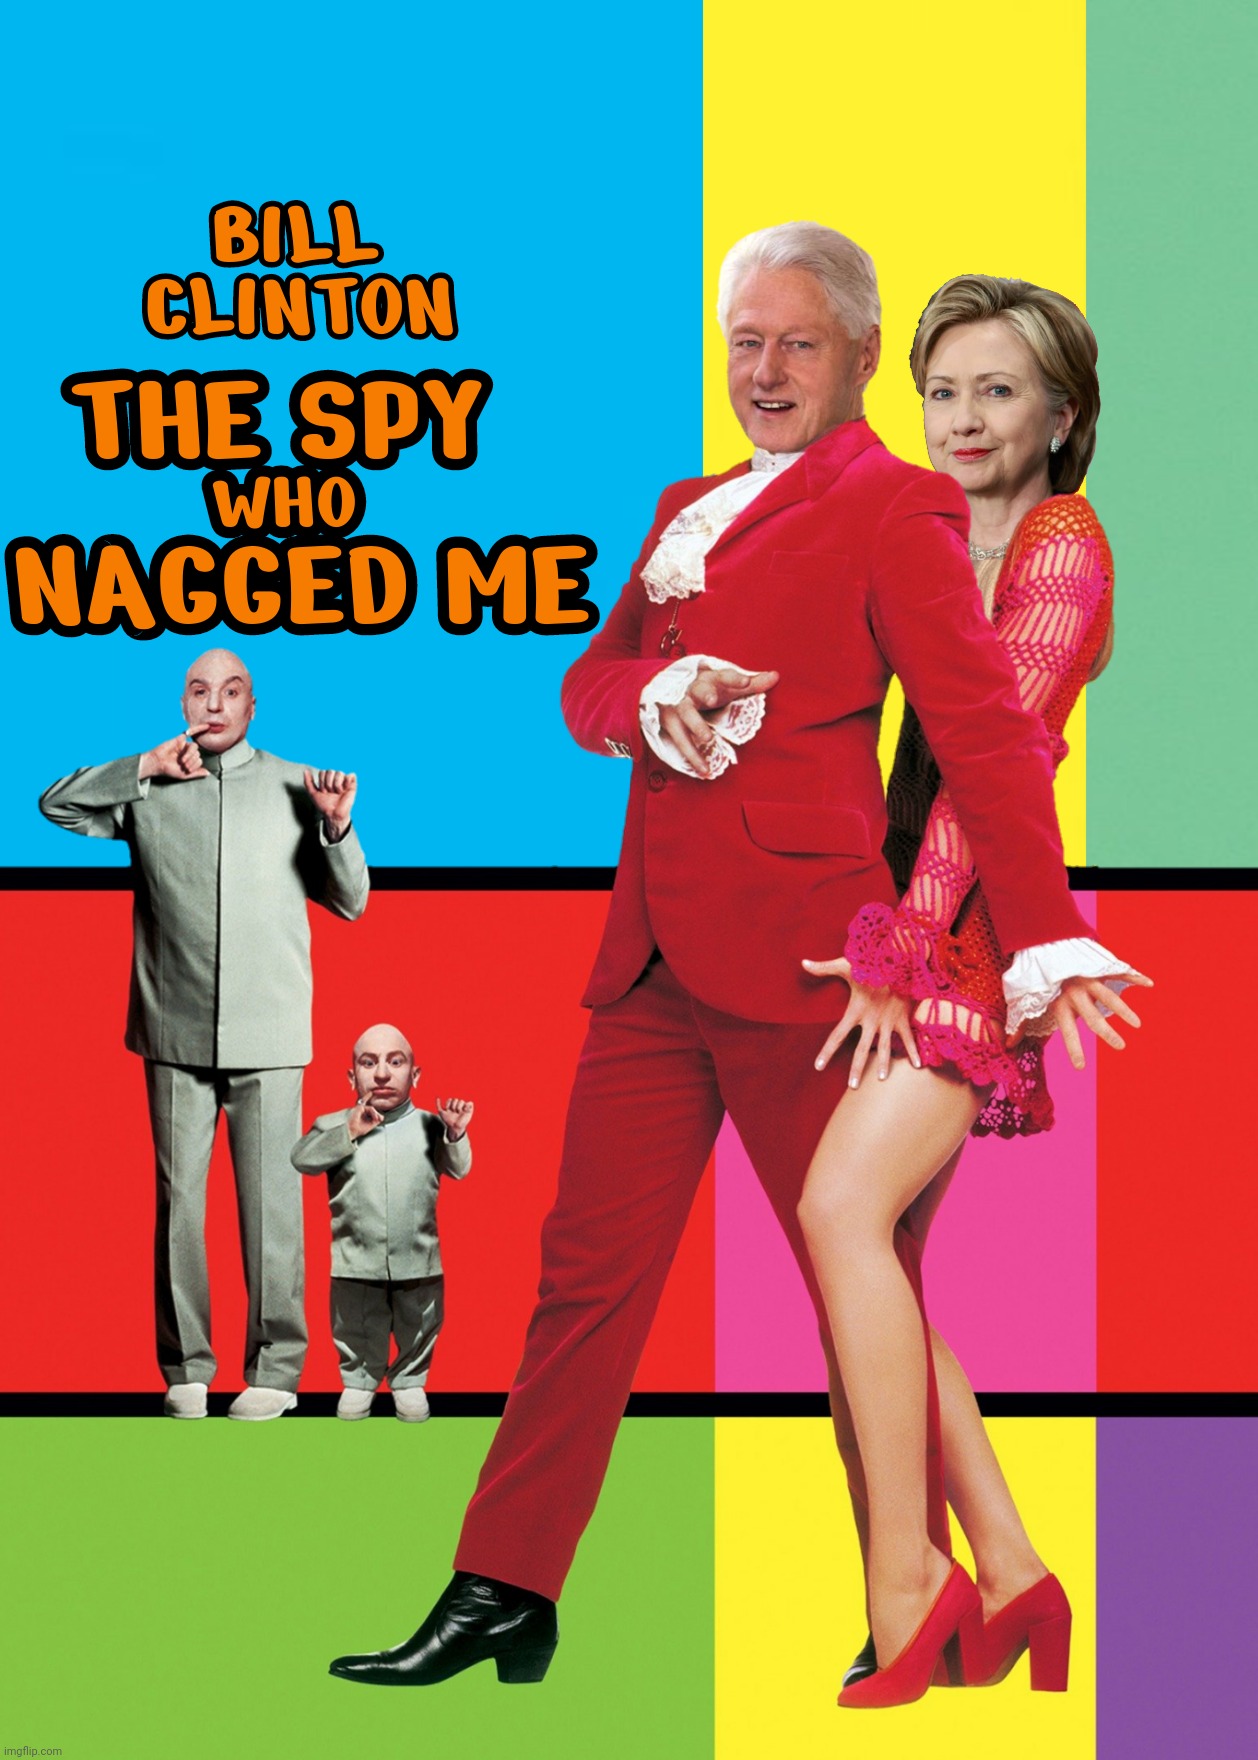 Bad Photoshop Sunday presents:  Oh behave! | image tagged in bad photoshop sunday,austin powers,bill clinton,hillary clinton,the spy who nagged me | made w/ Imgflip meme maker